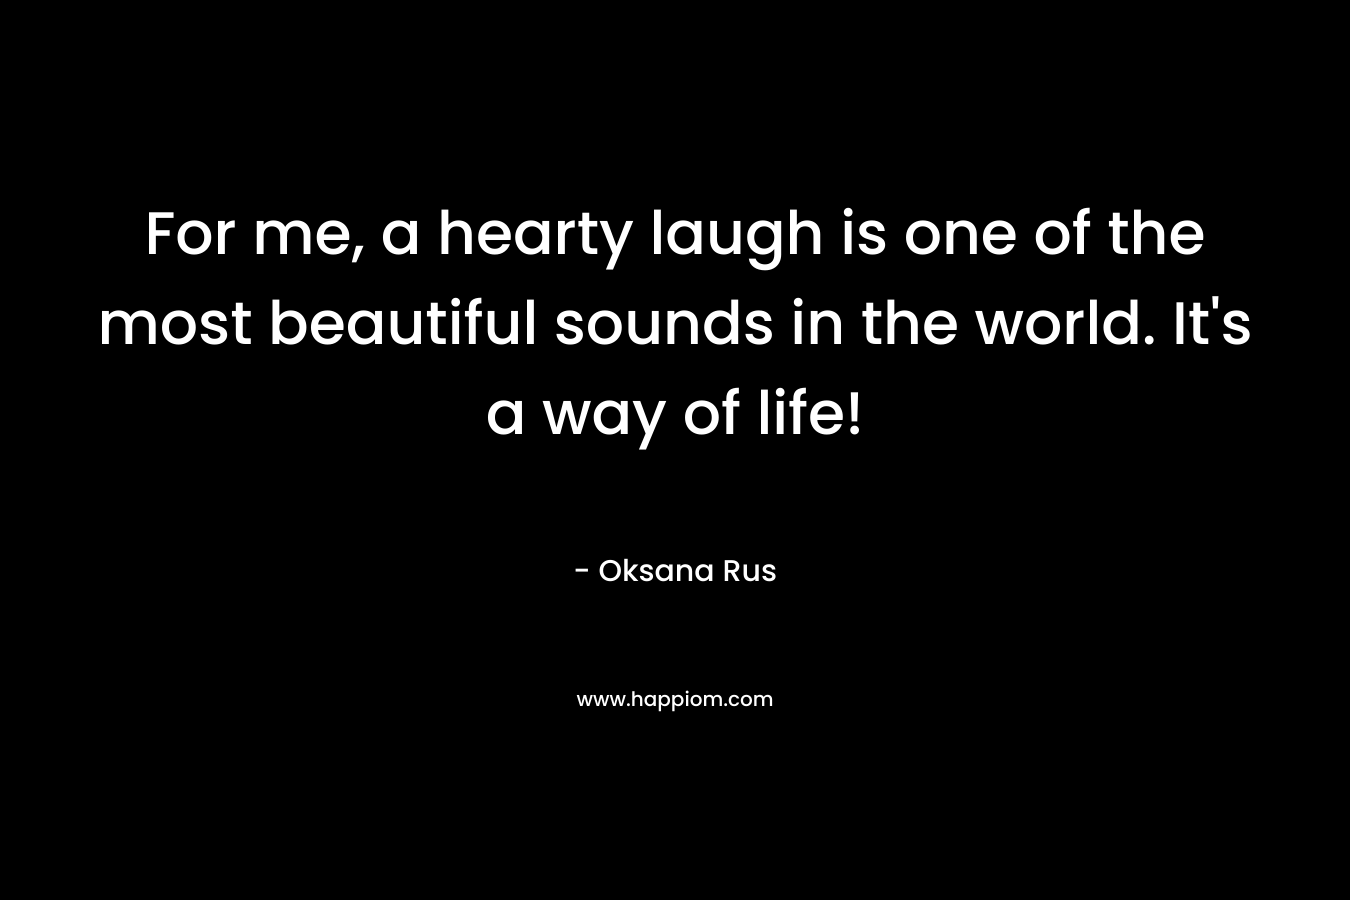 For me, a hearty laugh is one of the most beautiful sounds in the world. It’s a way of life! – Oksana Rus